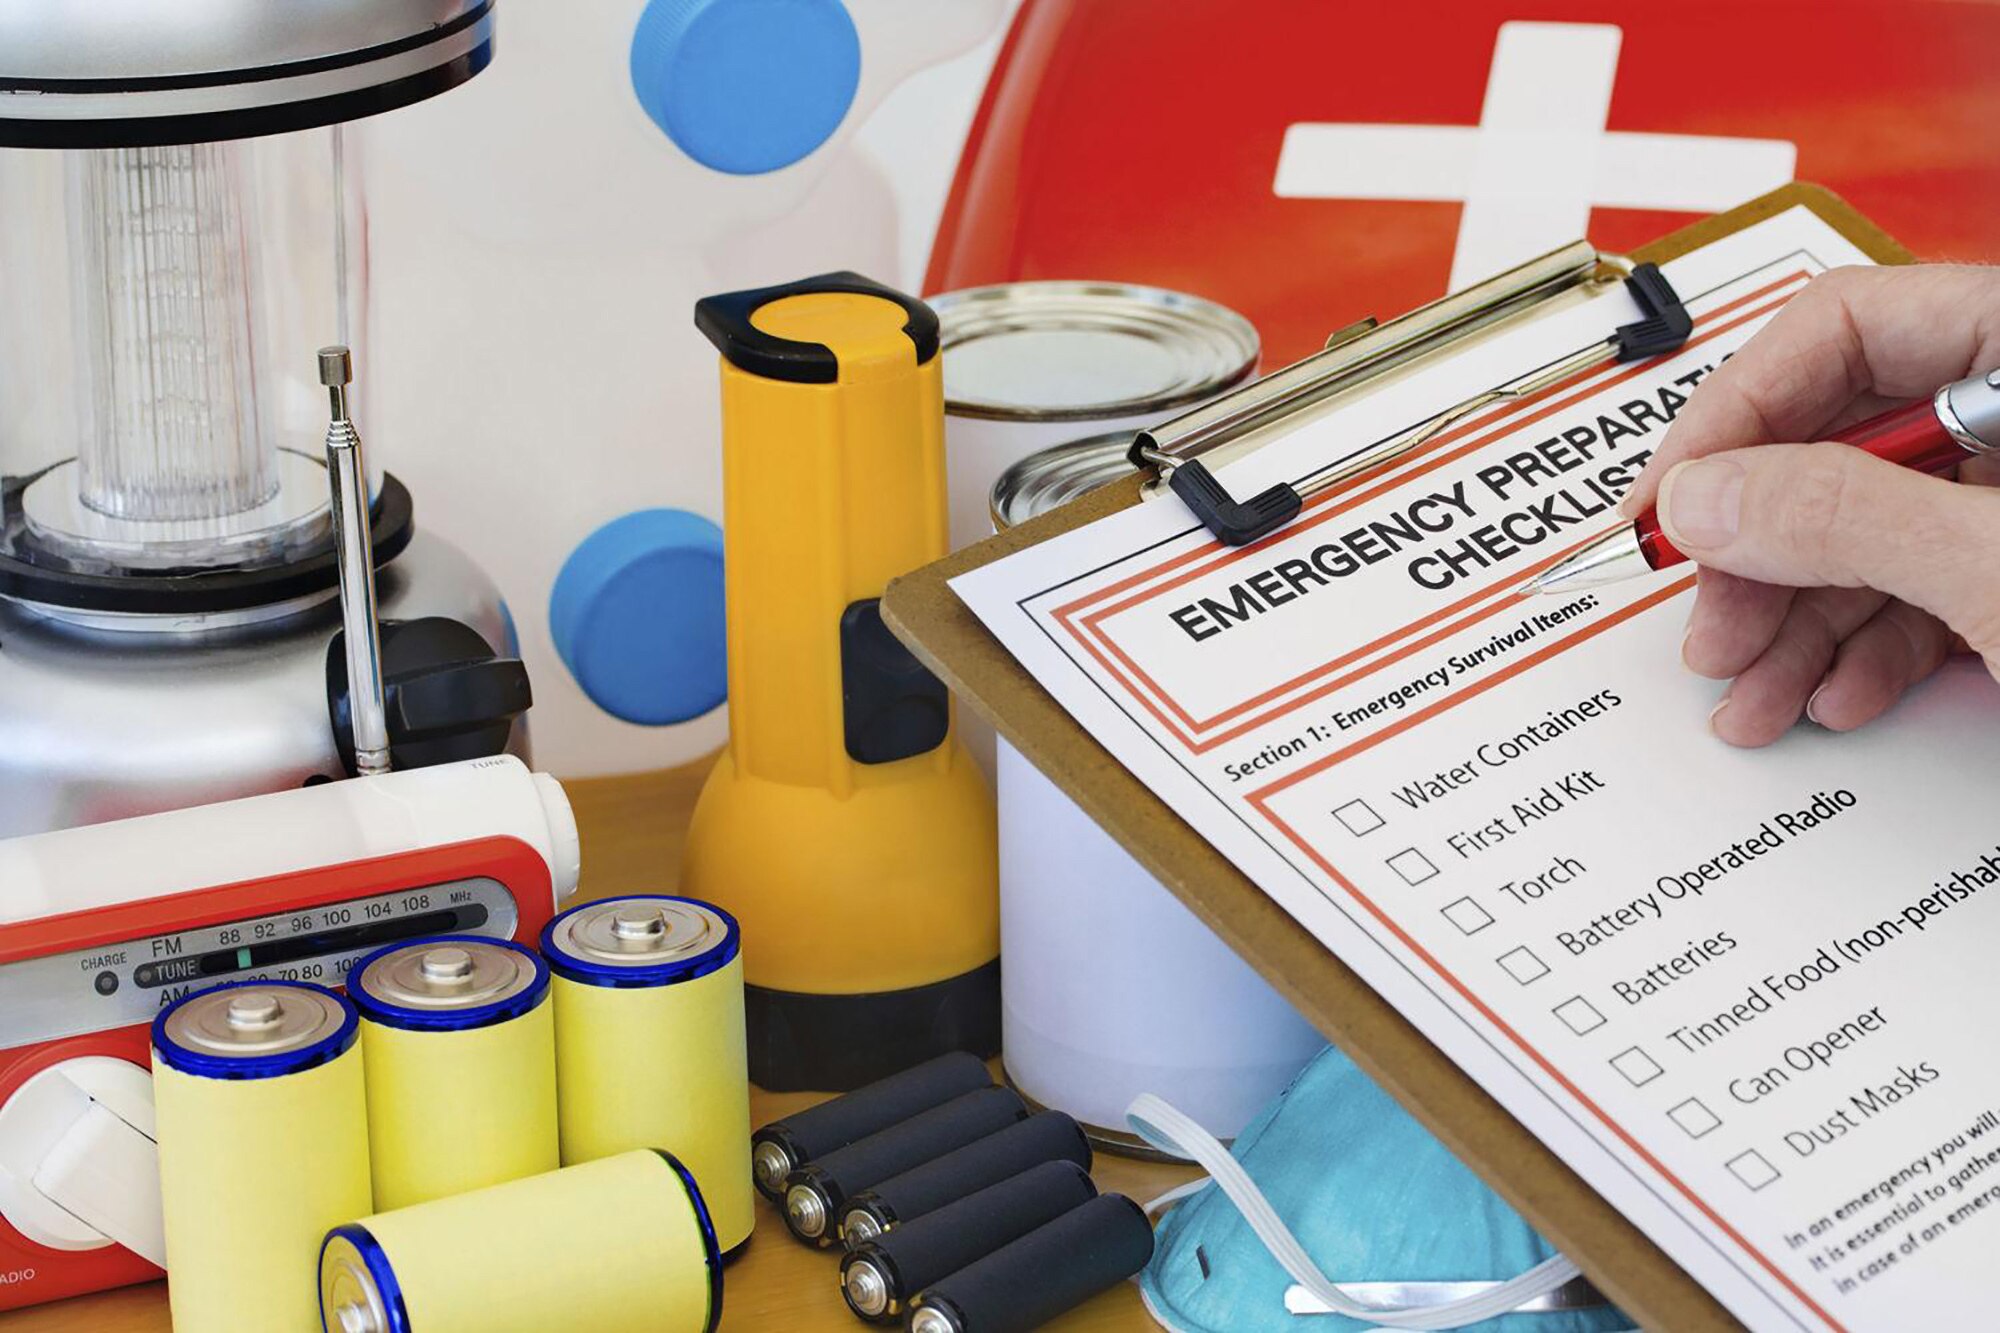 A key step of emergency preparedness is to get a kit together that includes the items needed to sustain a person or family for three days. The kit should be inventoried periodically to ensure it’s complete and items are not outdated.